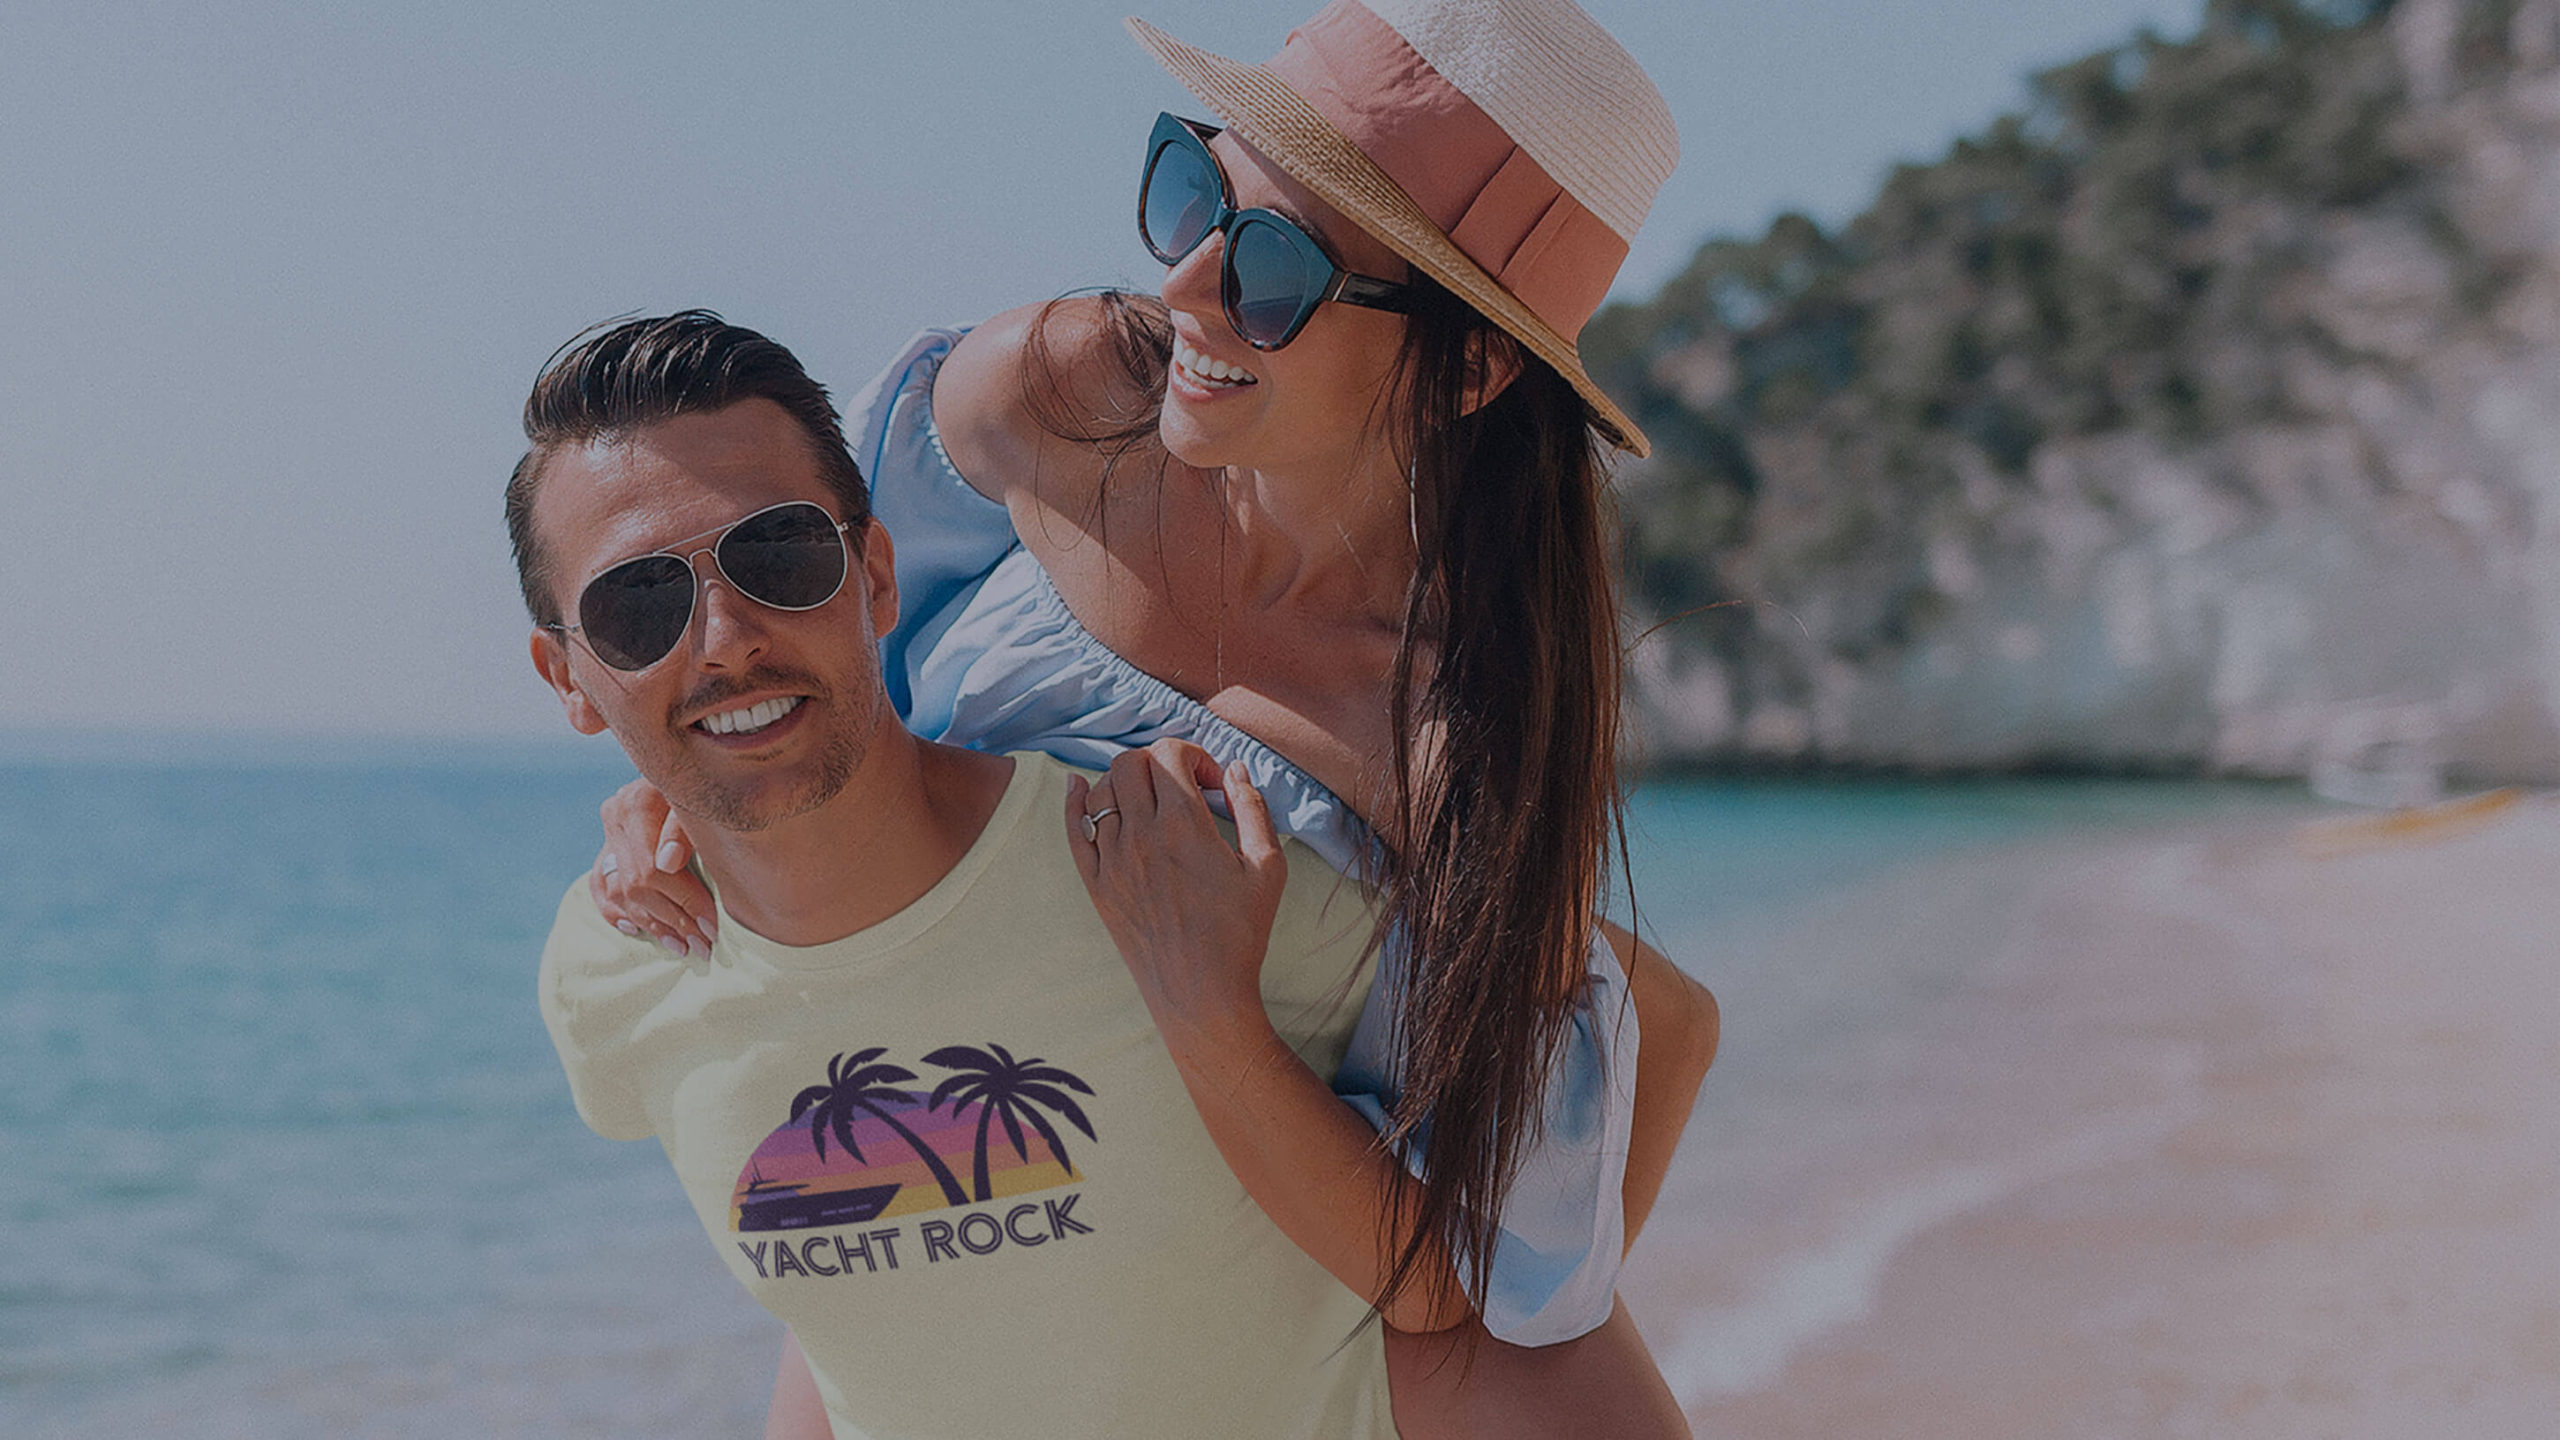 A woman is smiling as she is carried on a man's back at the beach while he is wearing the "A Yacht Rock Sunset" tee shirt by Yacht Rock Clothing.